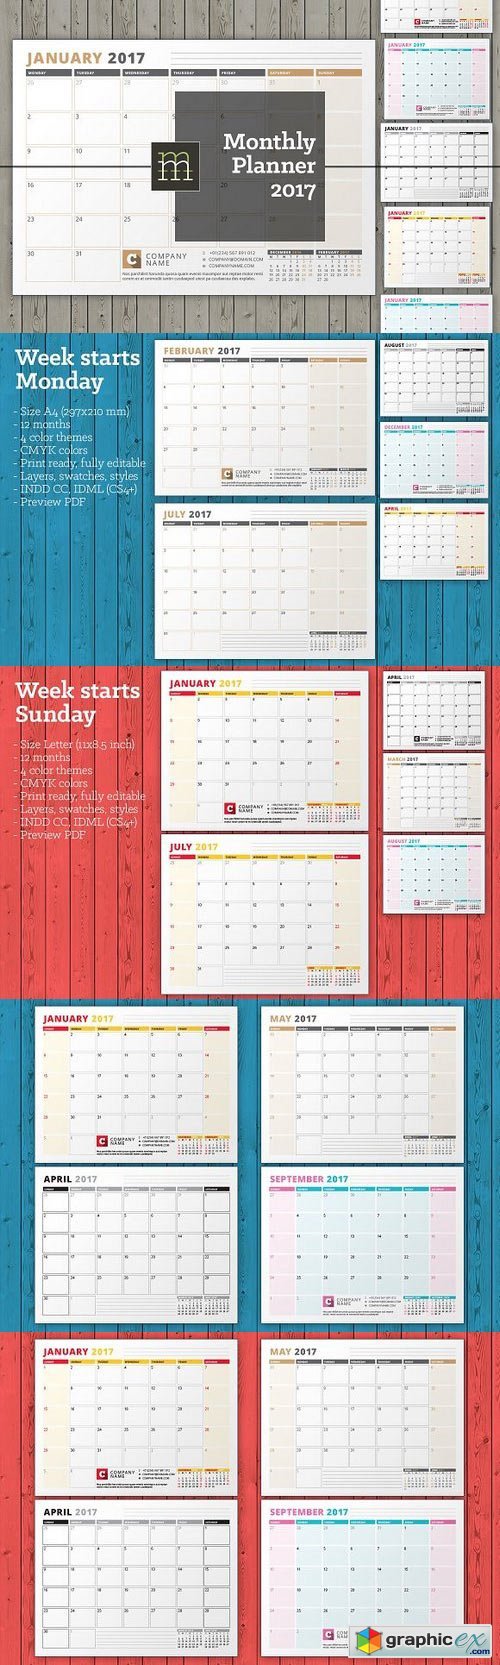 Monthly Planner 2017 (MP10)